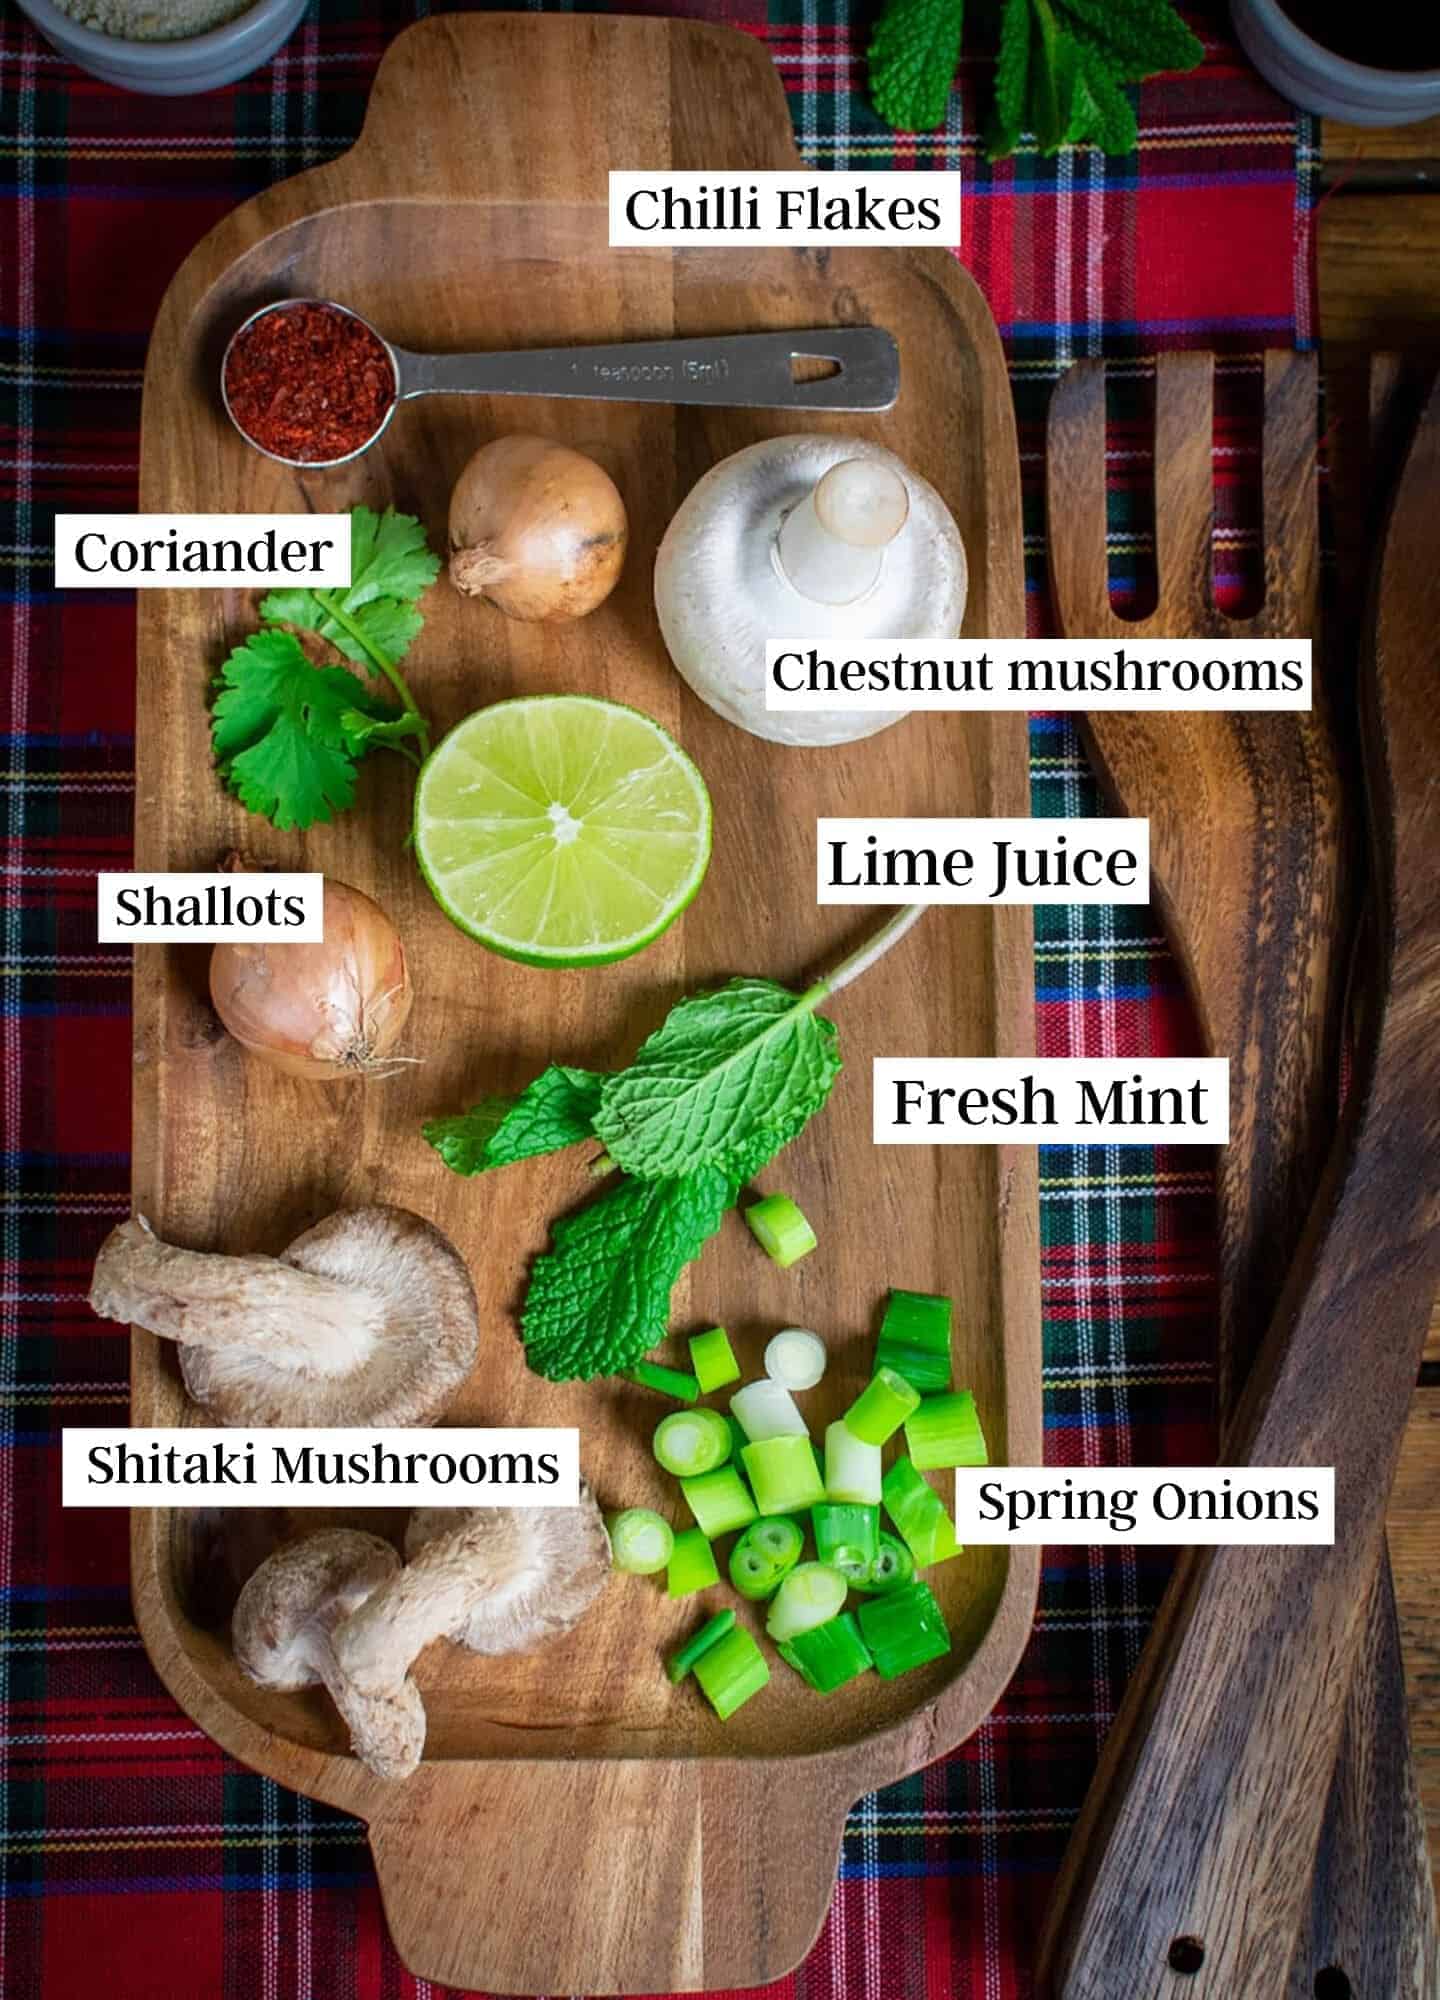 Ingredients laid out and labelled on a wooden tray